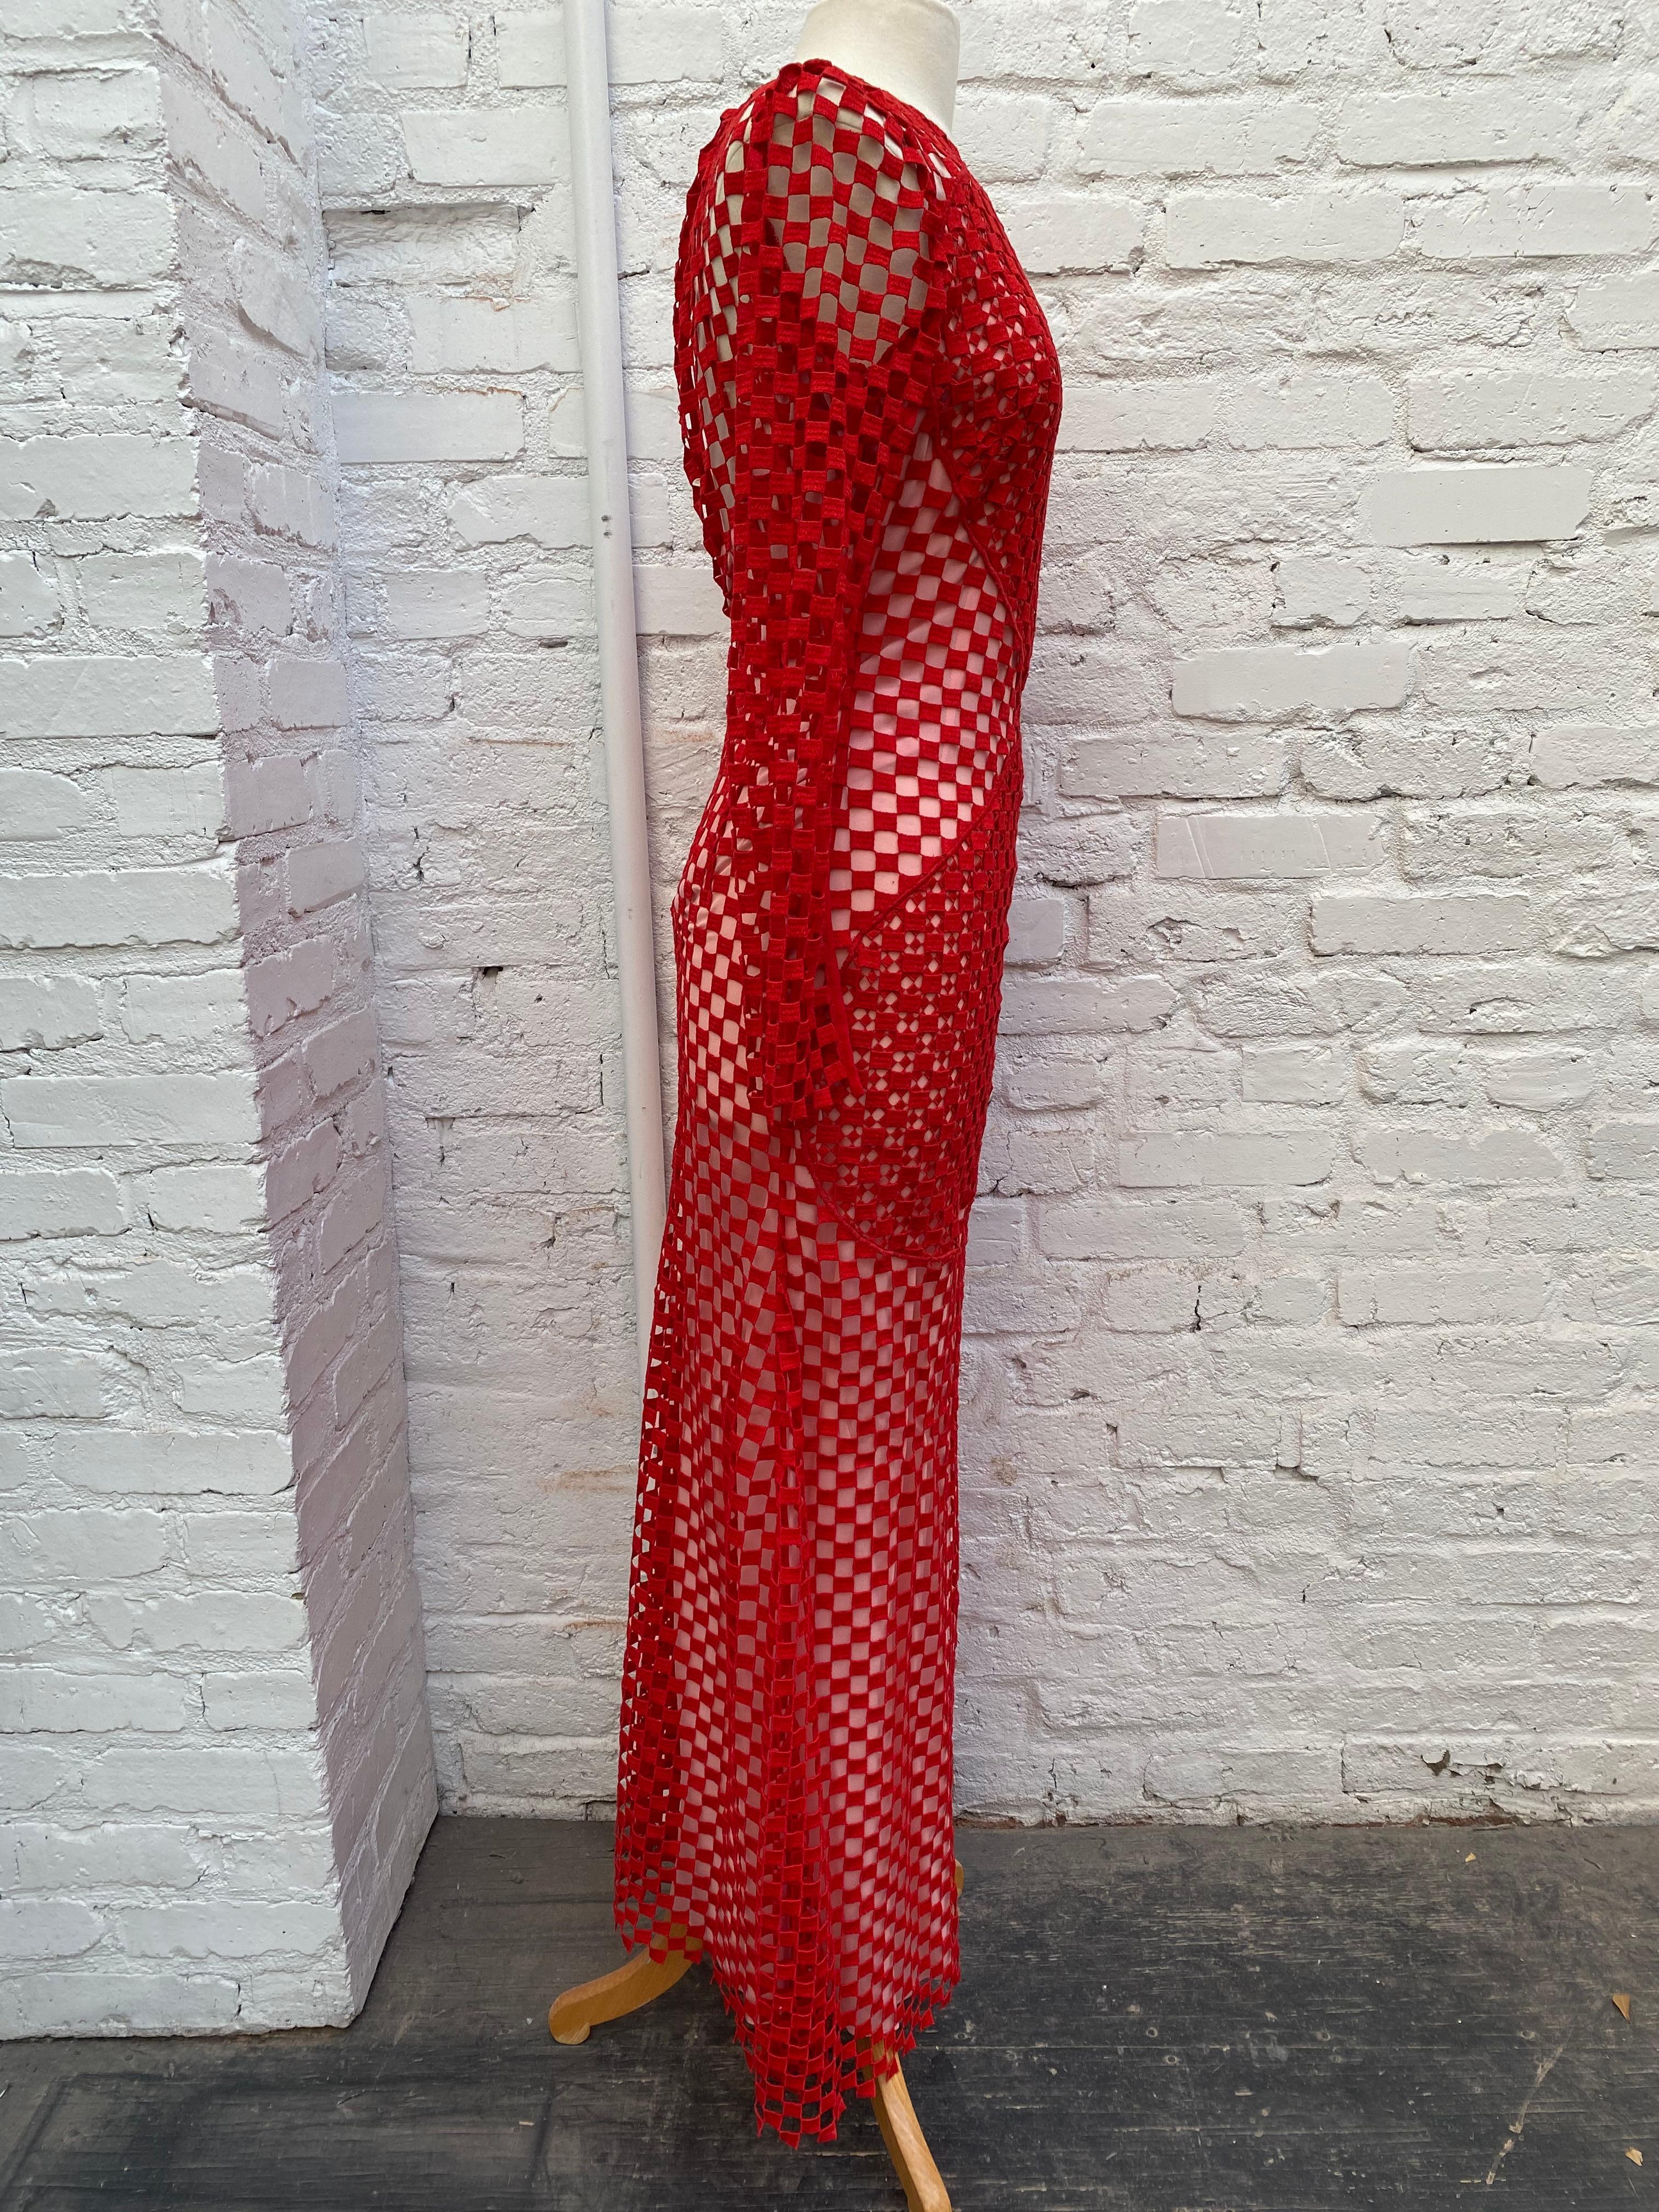 Akris Red Crochet Dress. Mint condition like new. Full length crochet style dress. Guaranteed authentic. 

Measurements:
Shoulder to Shoulder: 17